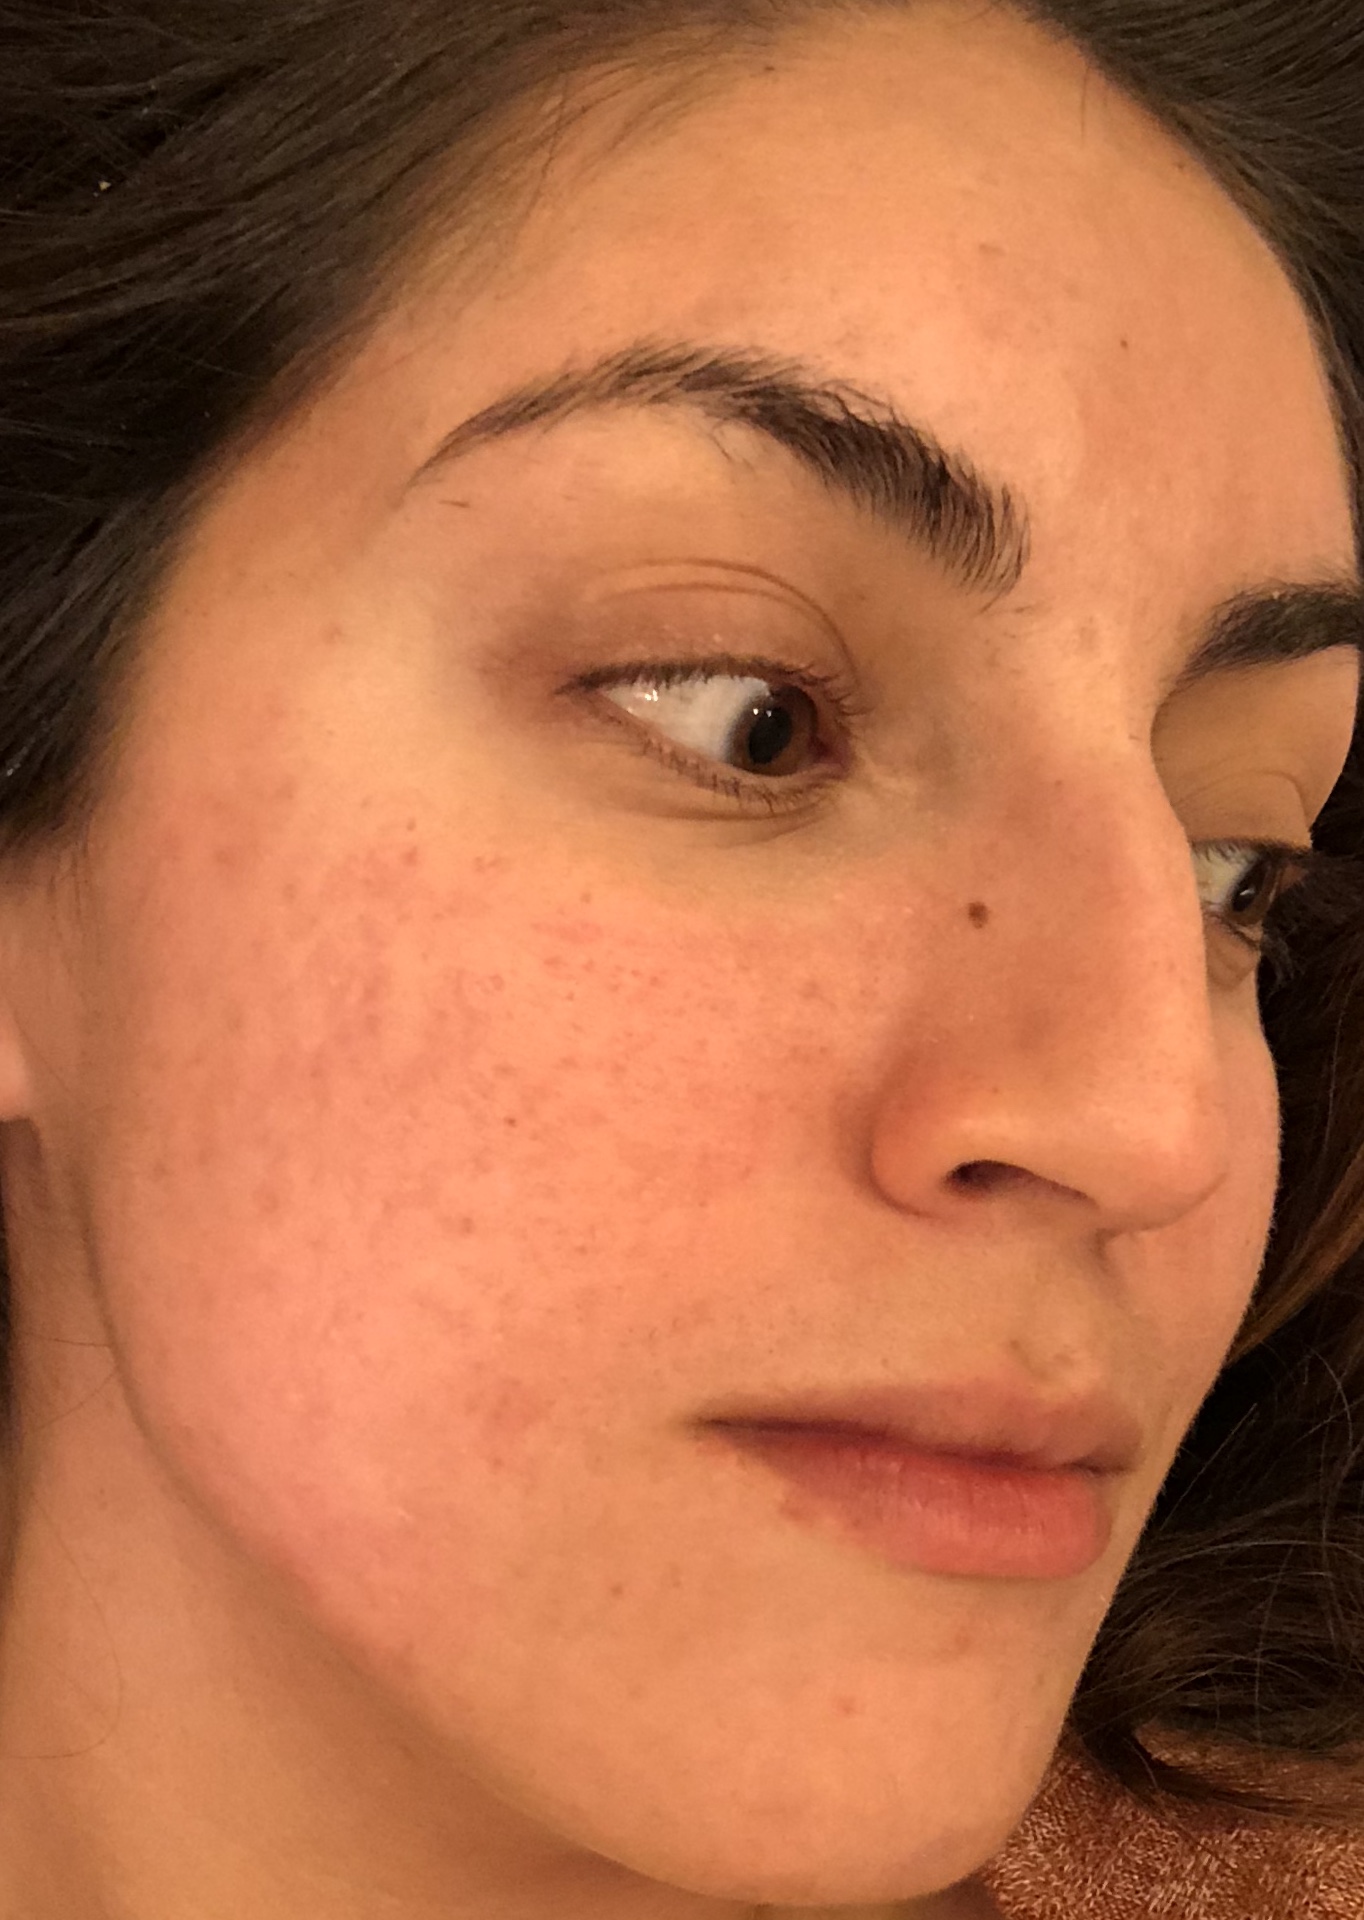 Acne Scar Removal Journey: A 5 month photo journal - Along Came Alex